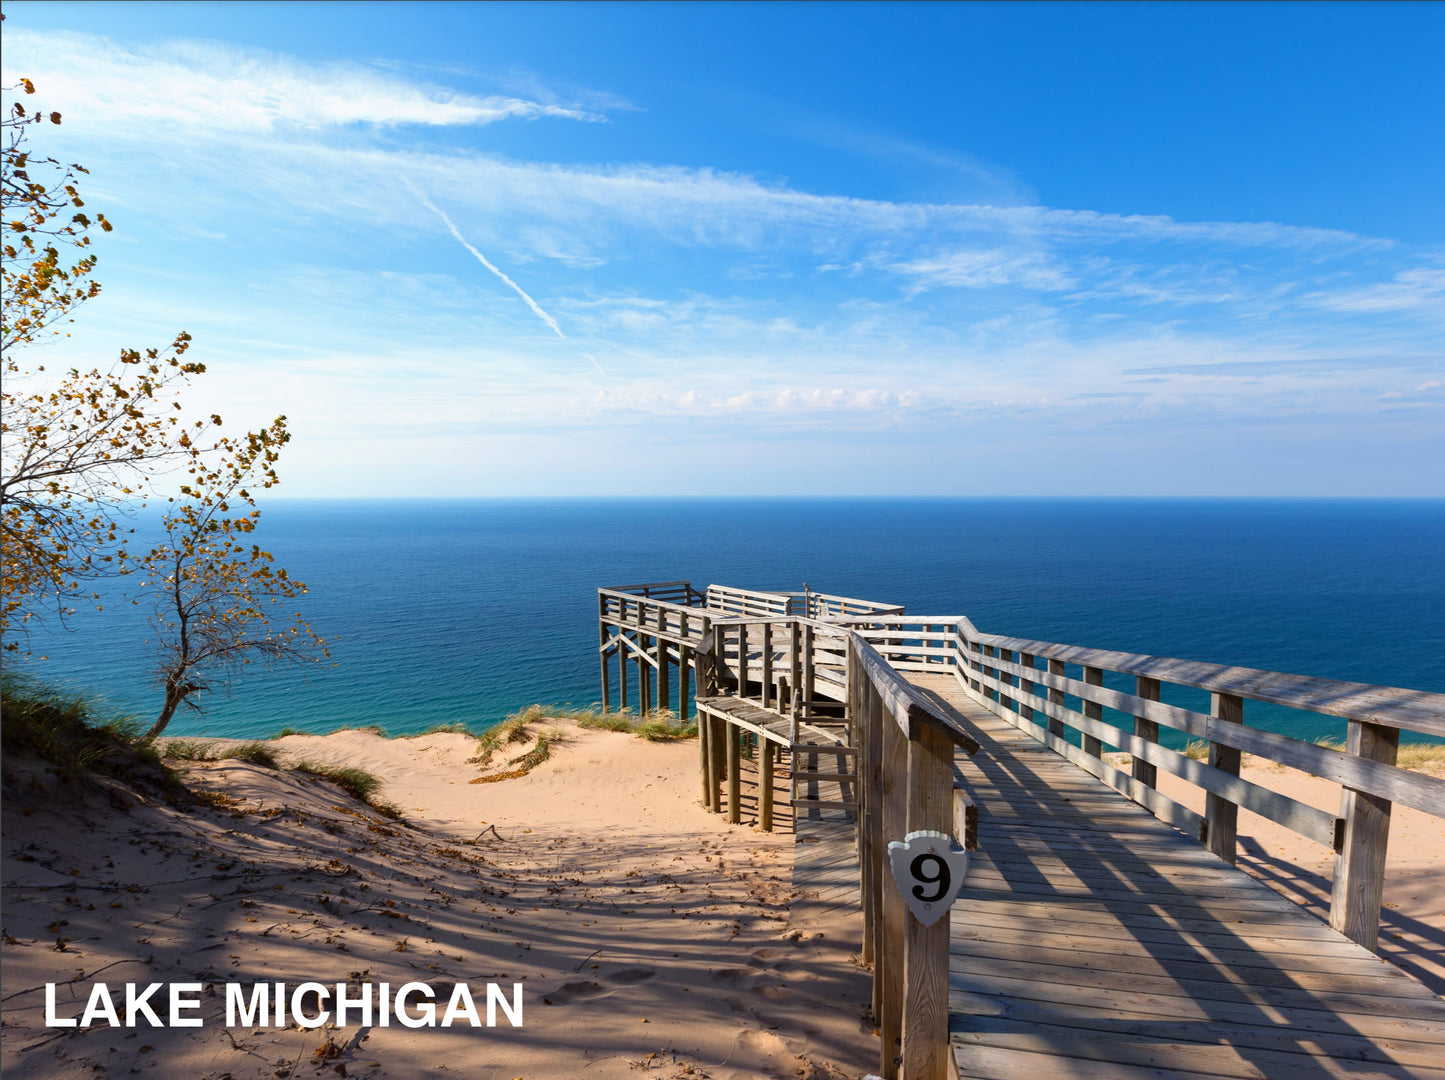 The Great Lakes Shoreline Tour by Mike and Jennifer Wendland